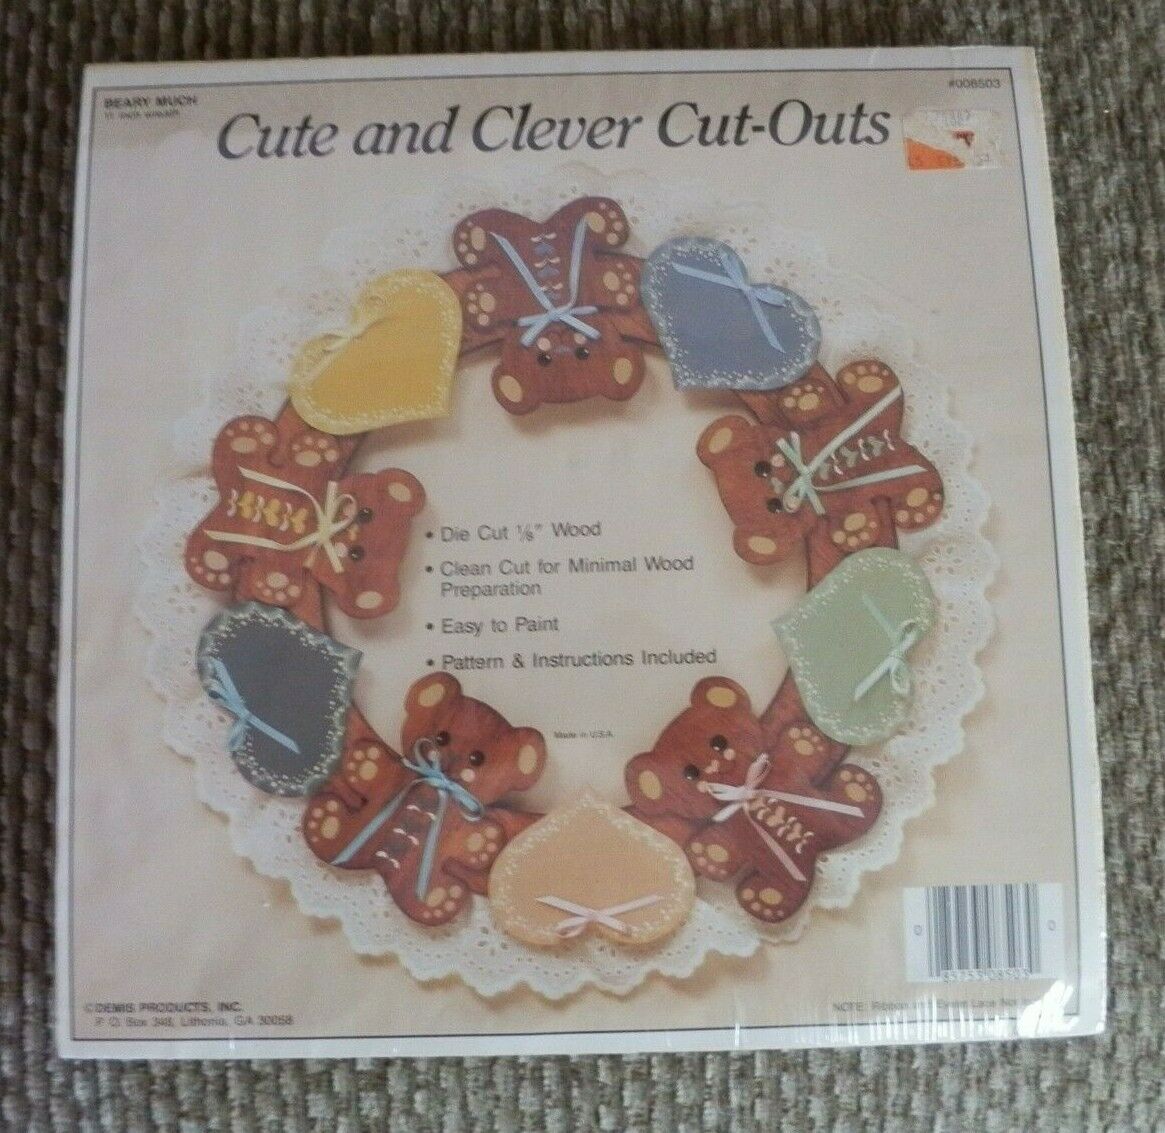 New Sealed Wood Wreath Kit Beary Much Teddy Bears & Hearts Cute & Clever Cut Out